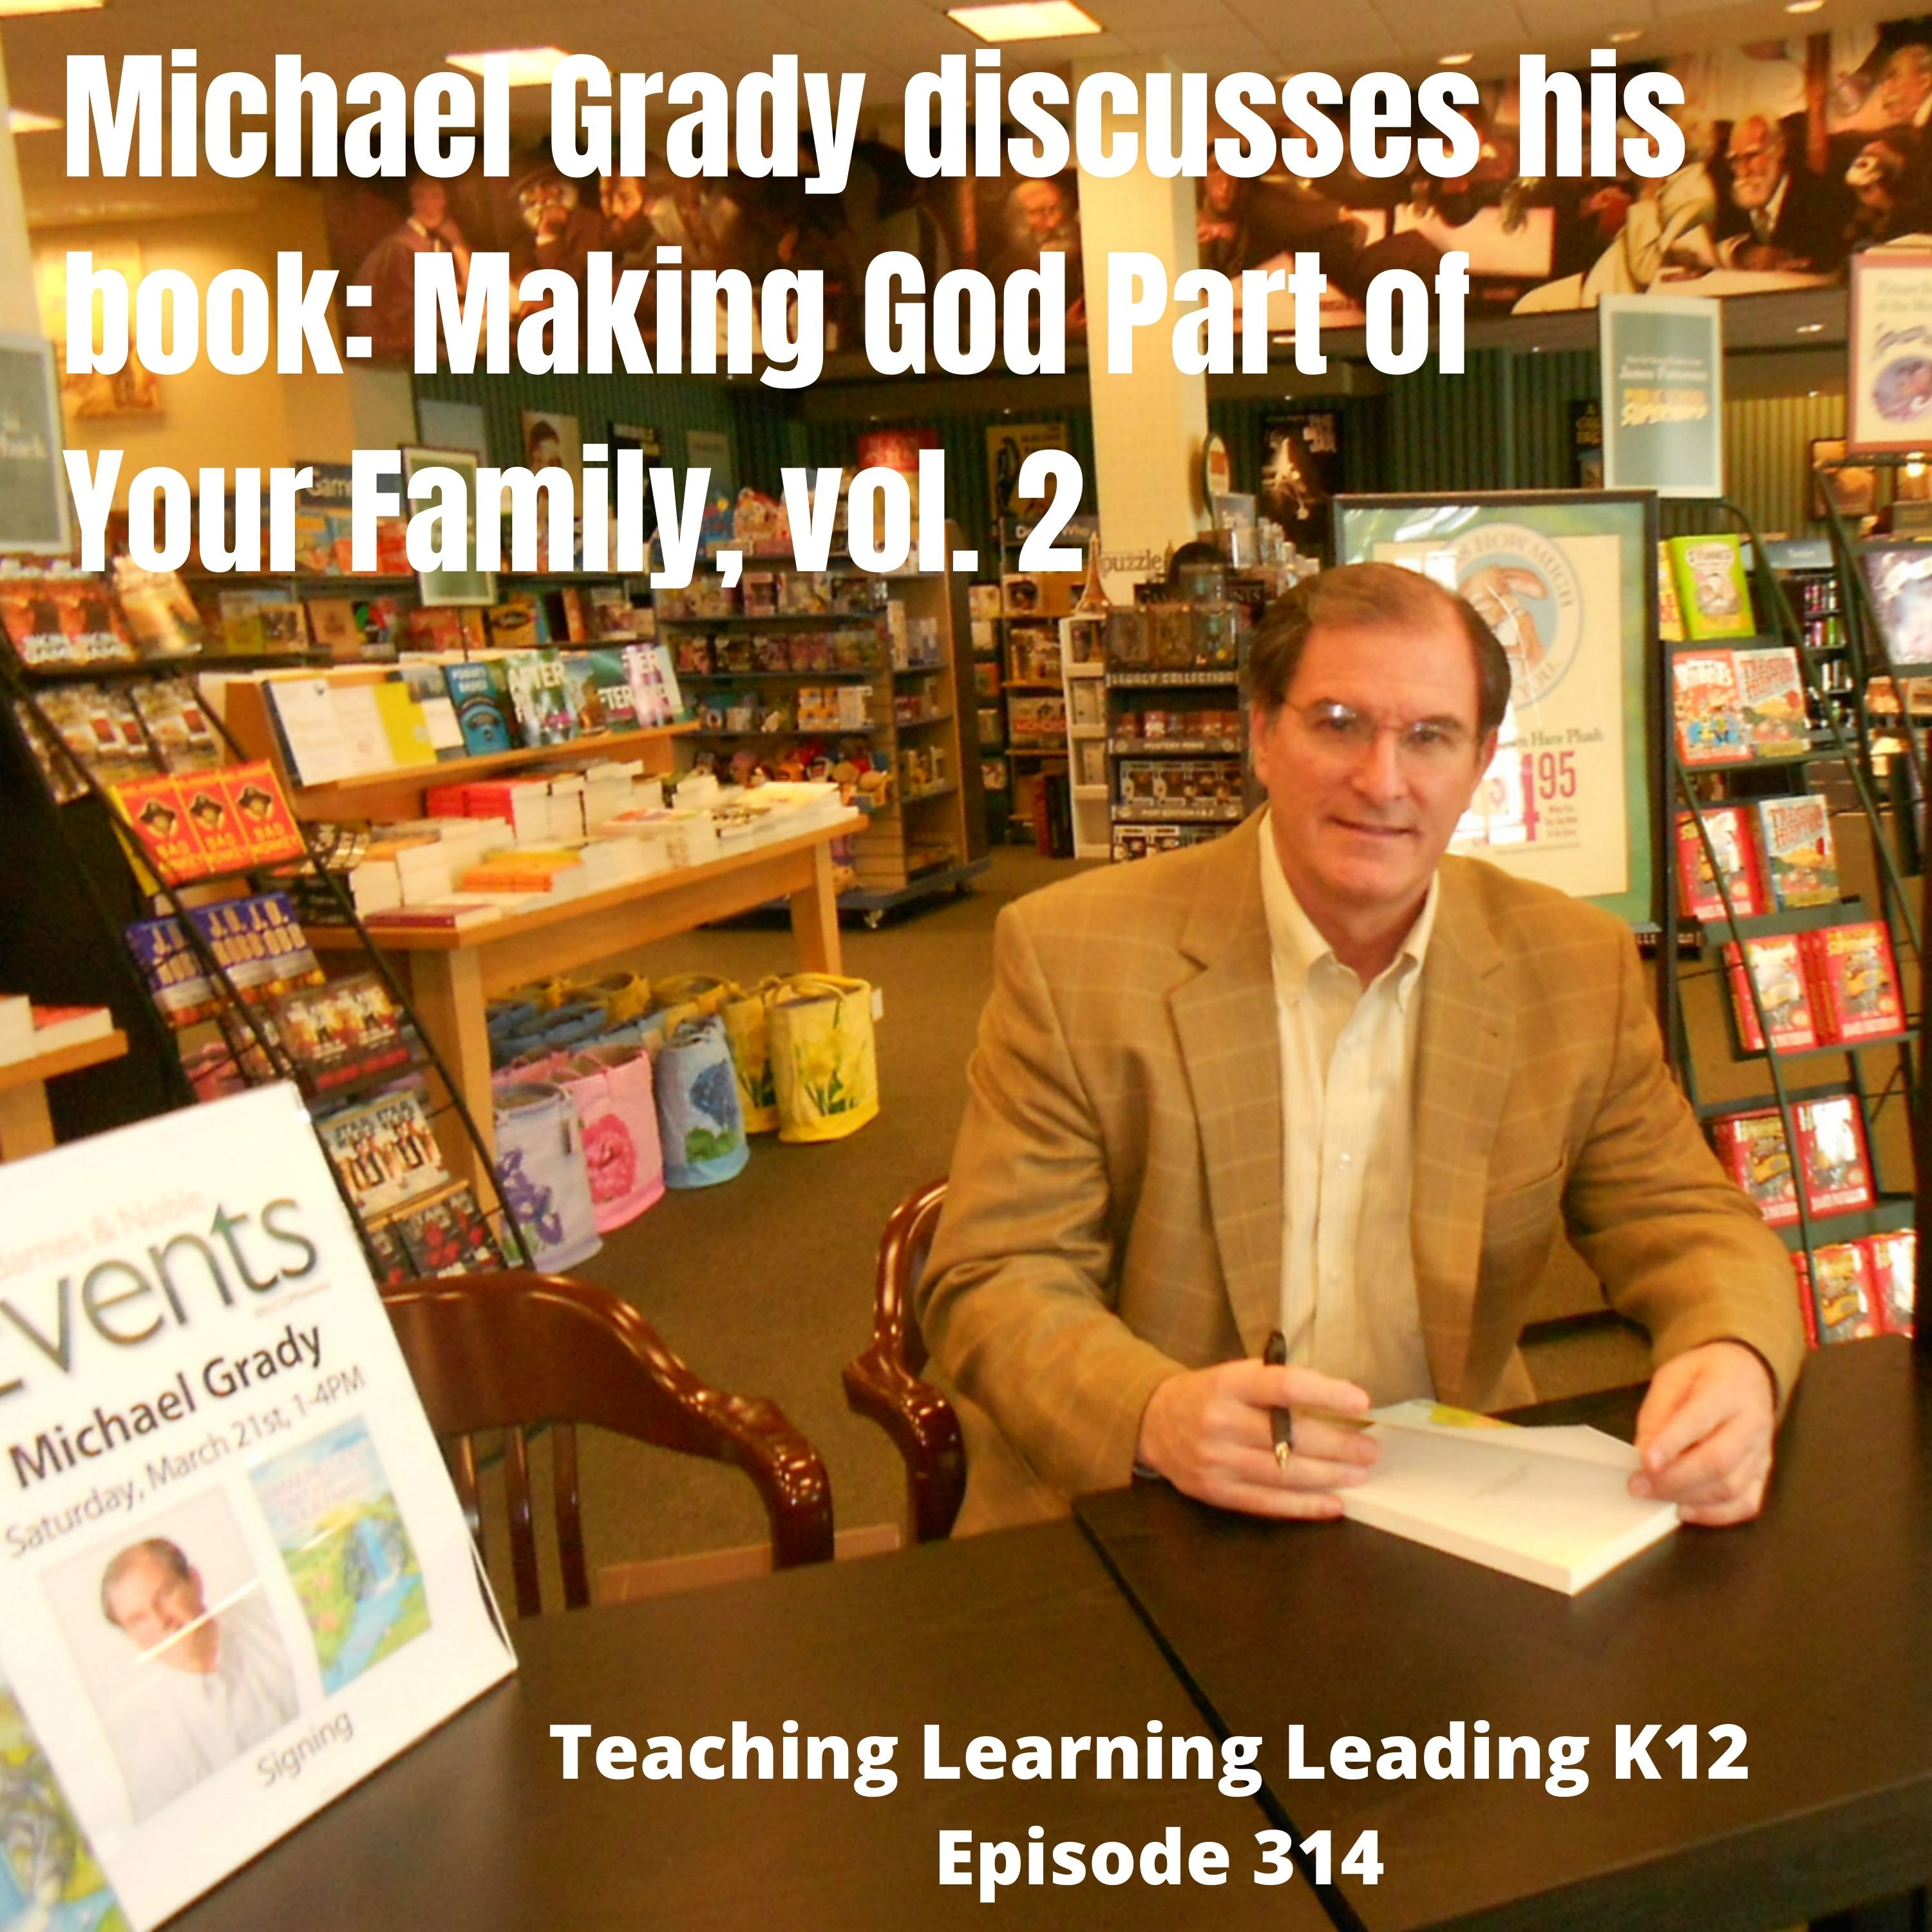 Michael Grady discusses his book: Making God Part of Your Family, vol.2 - 314 Image